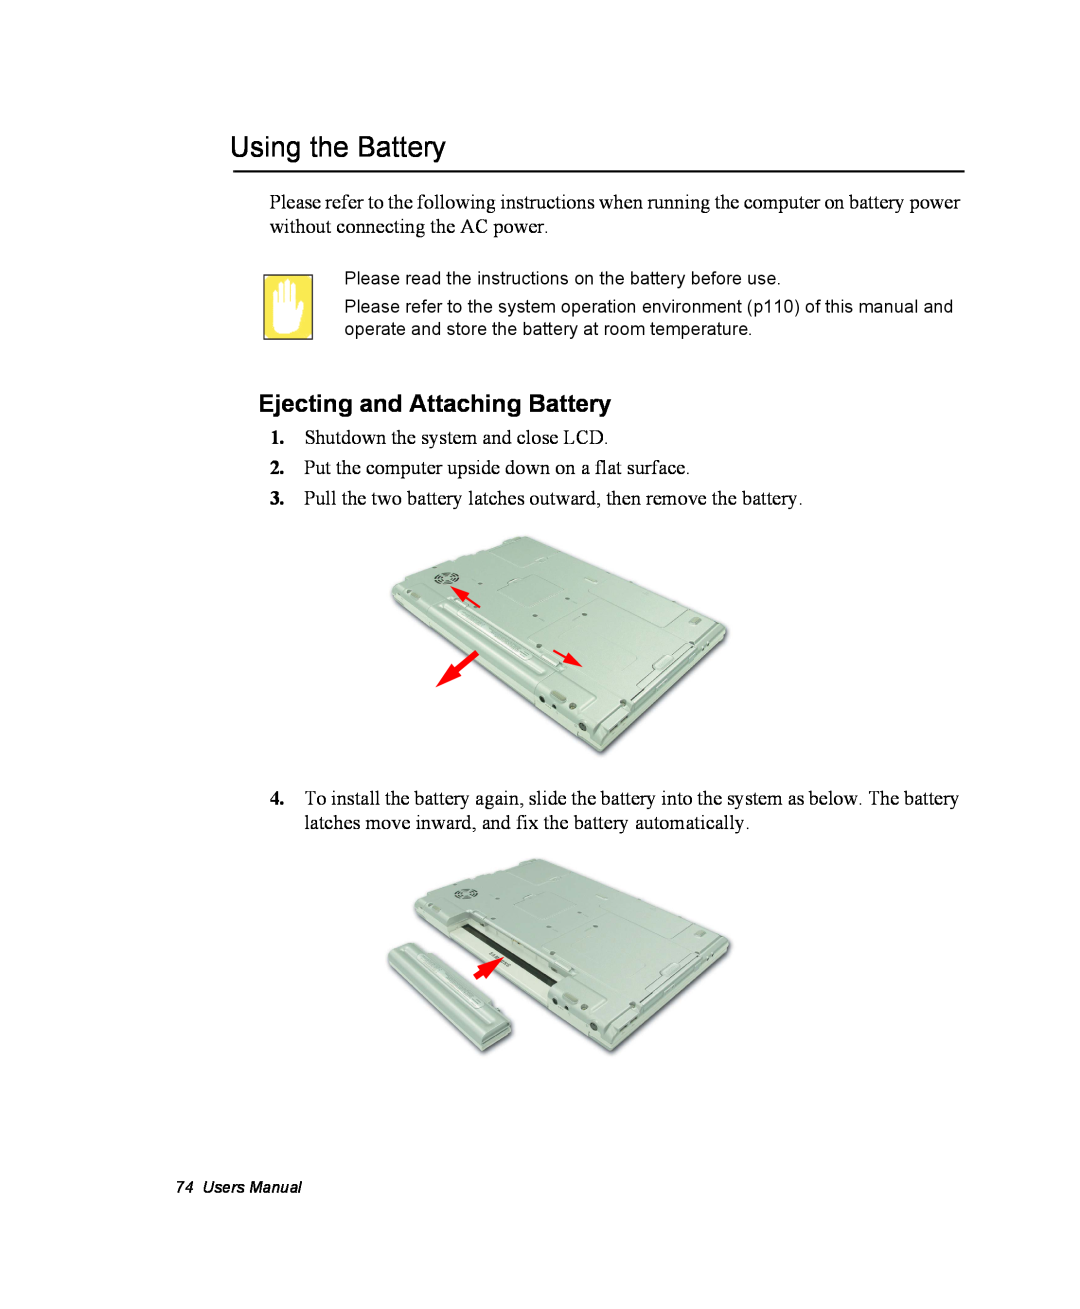 Samsung NM40TP0MG9/SEF, NM40PRDV02/SEF, NM40PRCV01/SEF, NM40PRTV02/SEF Using the Battery, Ejecting and Attaching Battery 